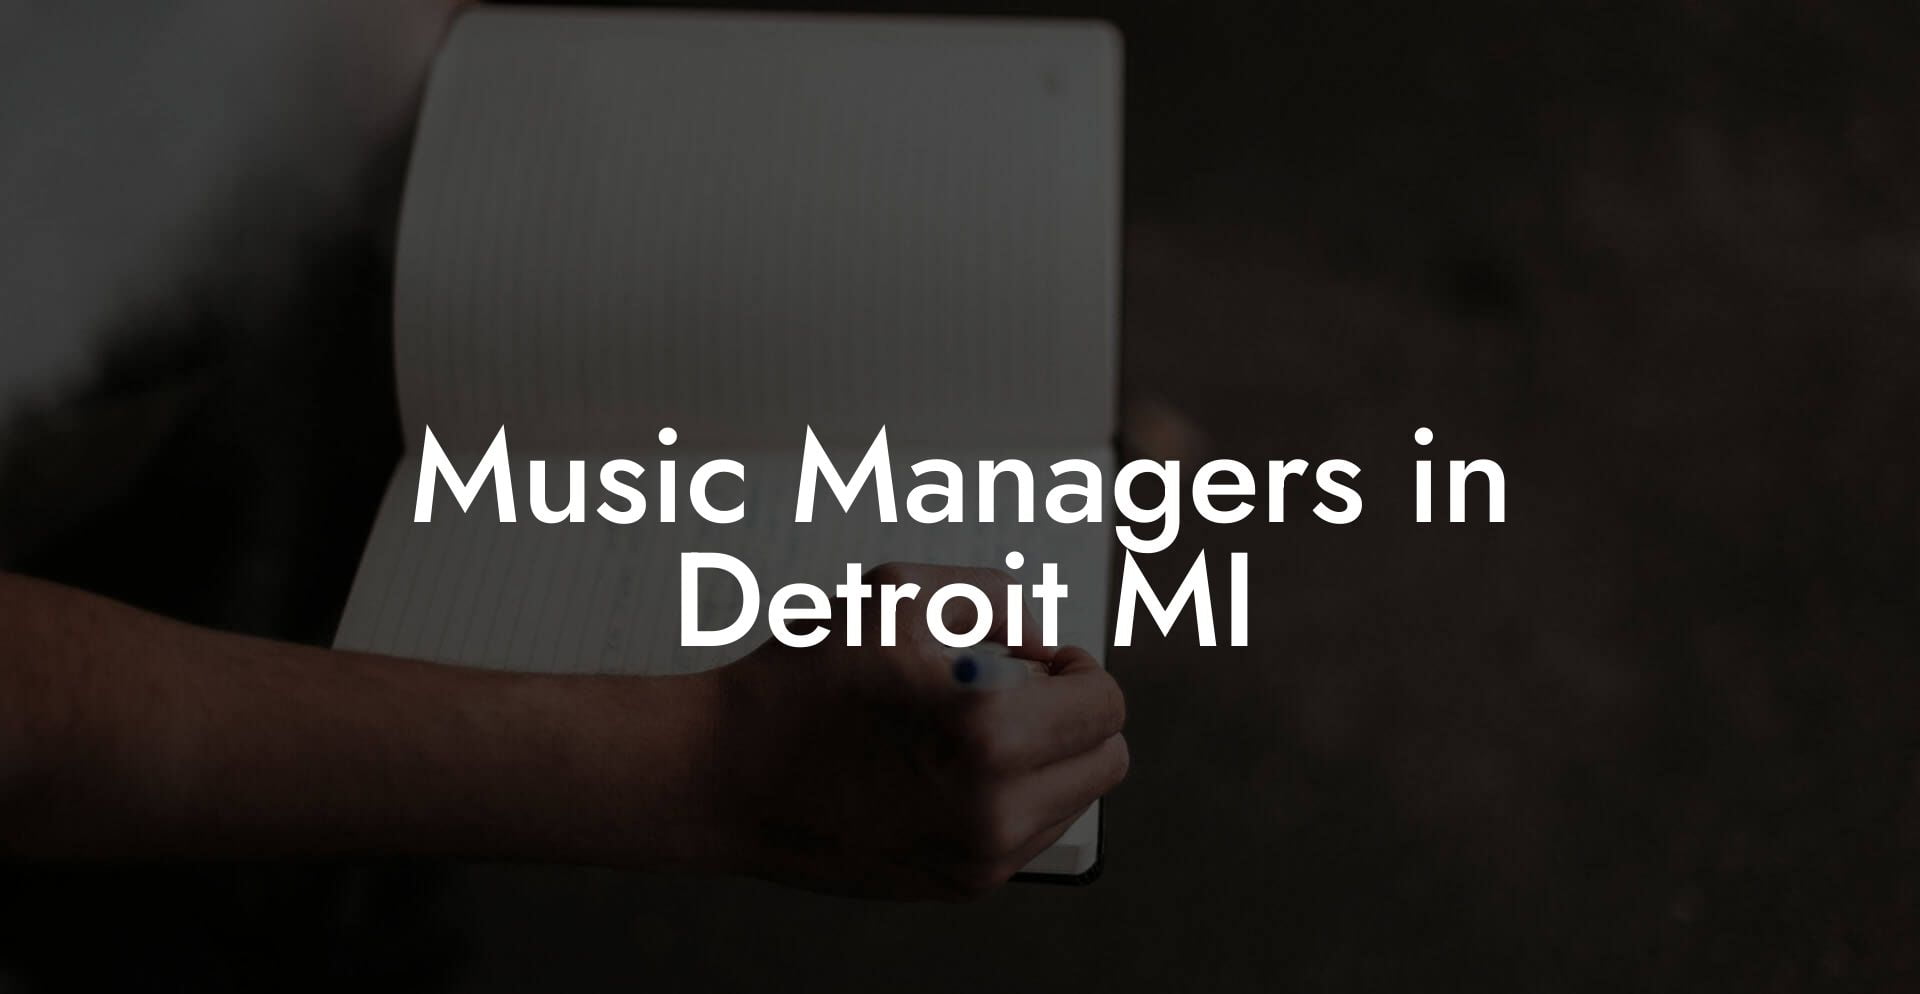 Music Managers in Detroit MI